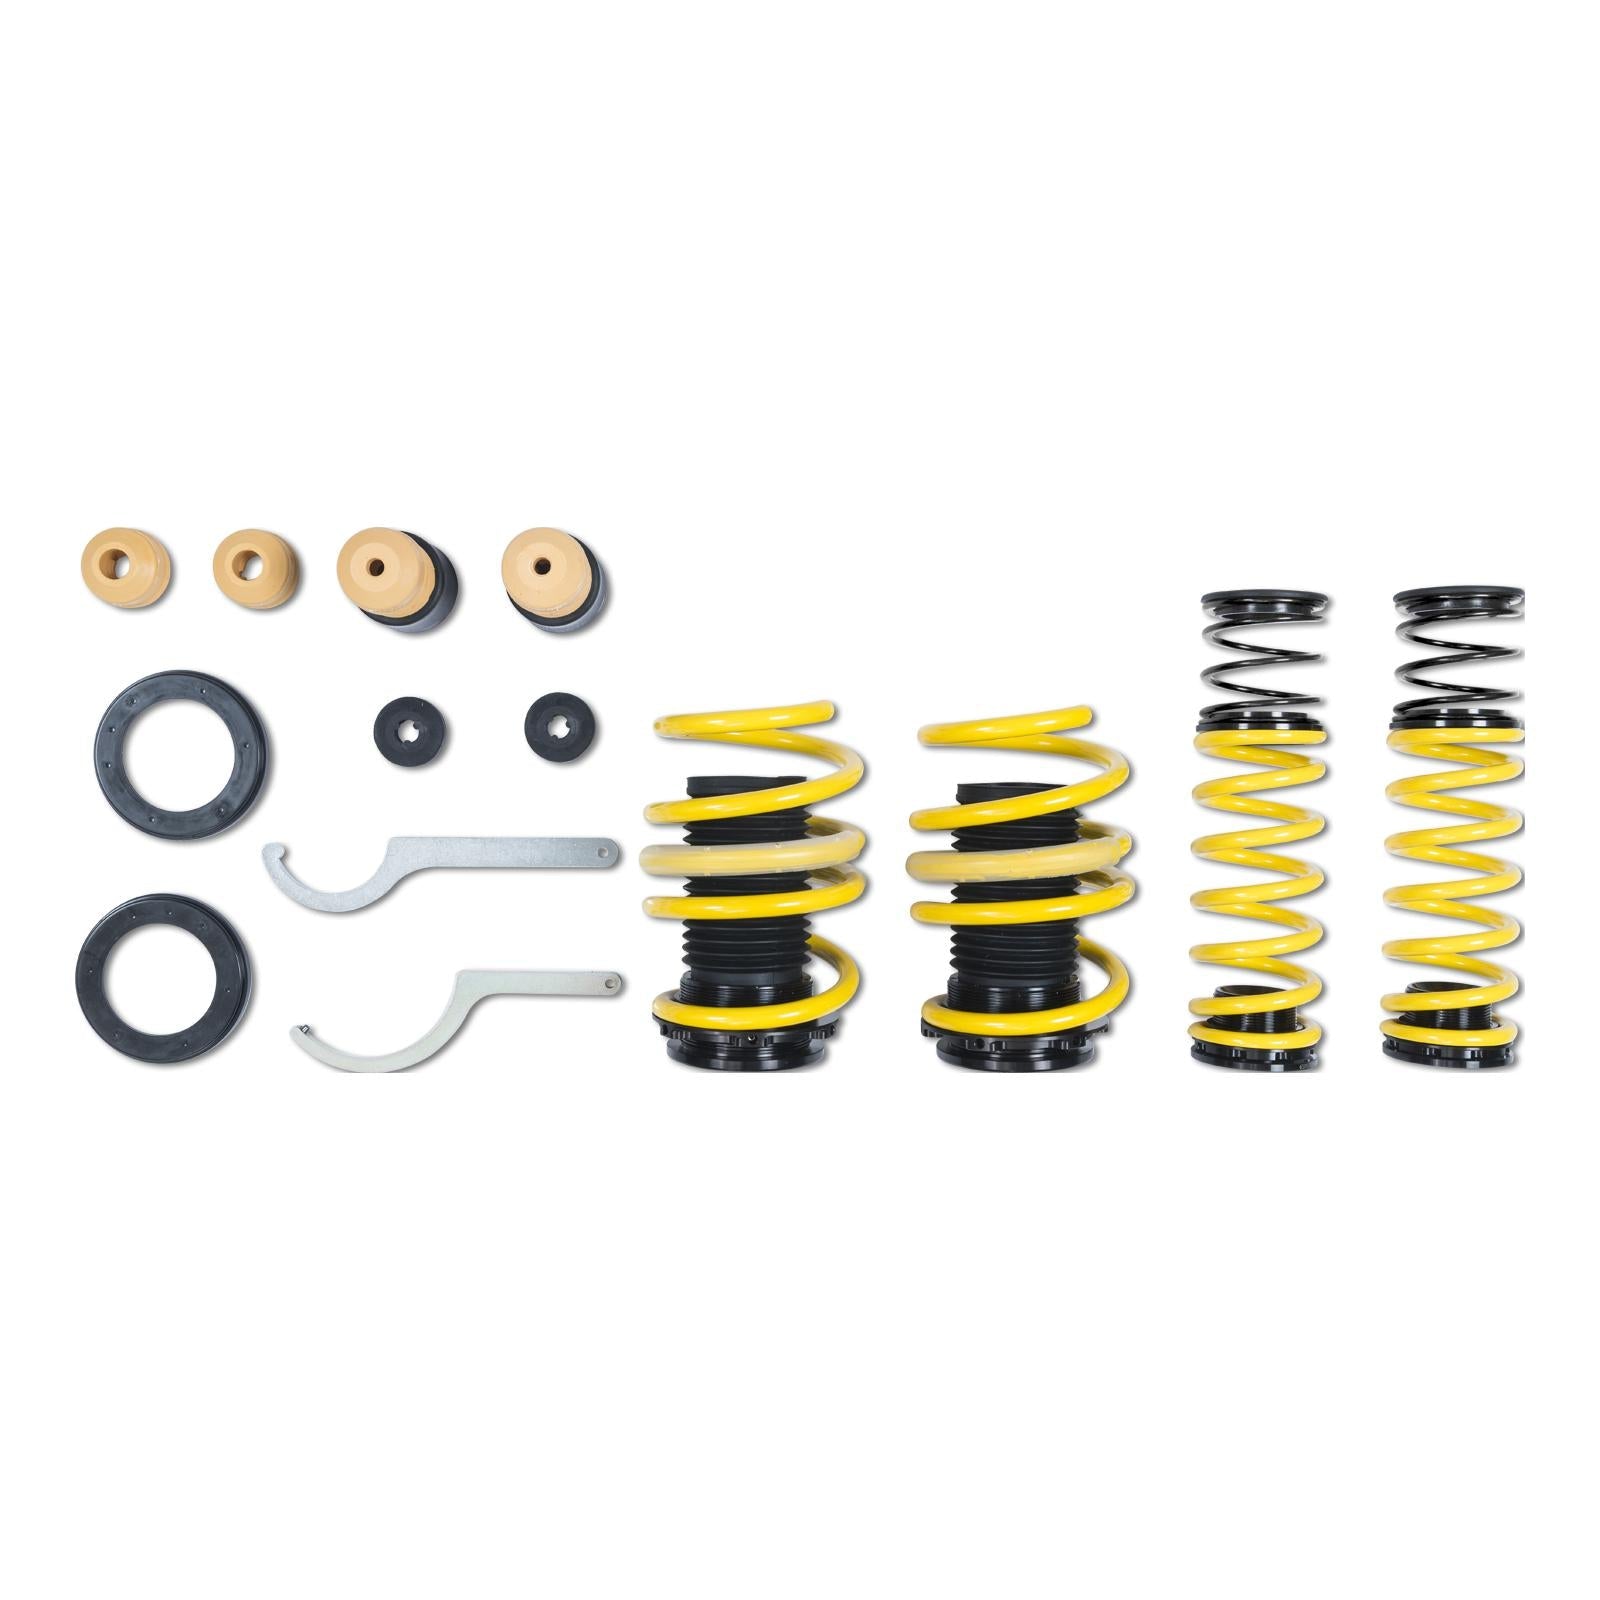 ST Suspensions Adjustable Lowering Springs - Audi 80A Q5/SQ5 With EDC System (Excludes Models with automatic level control)